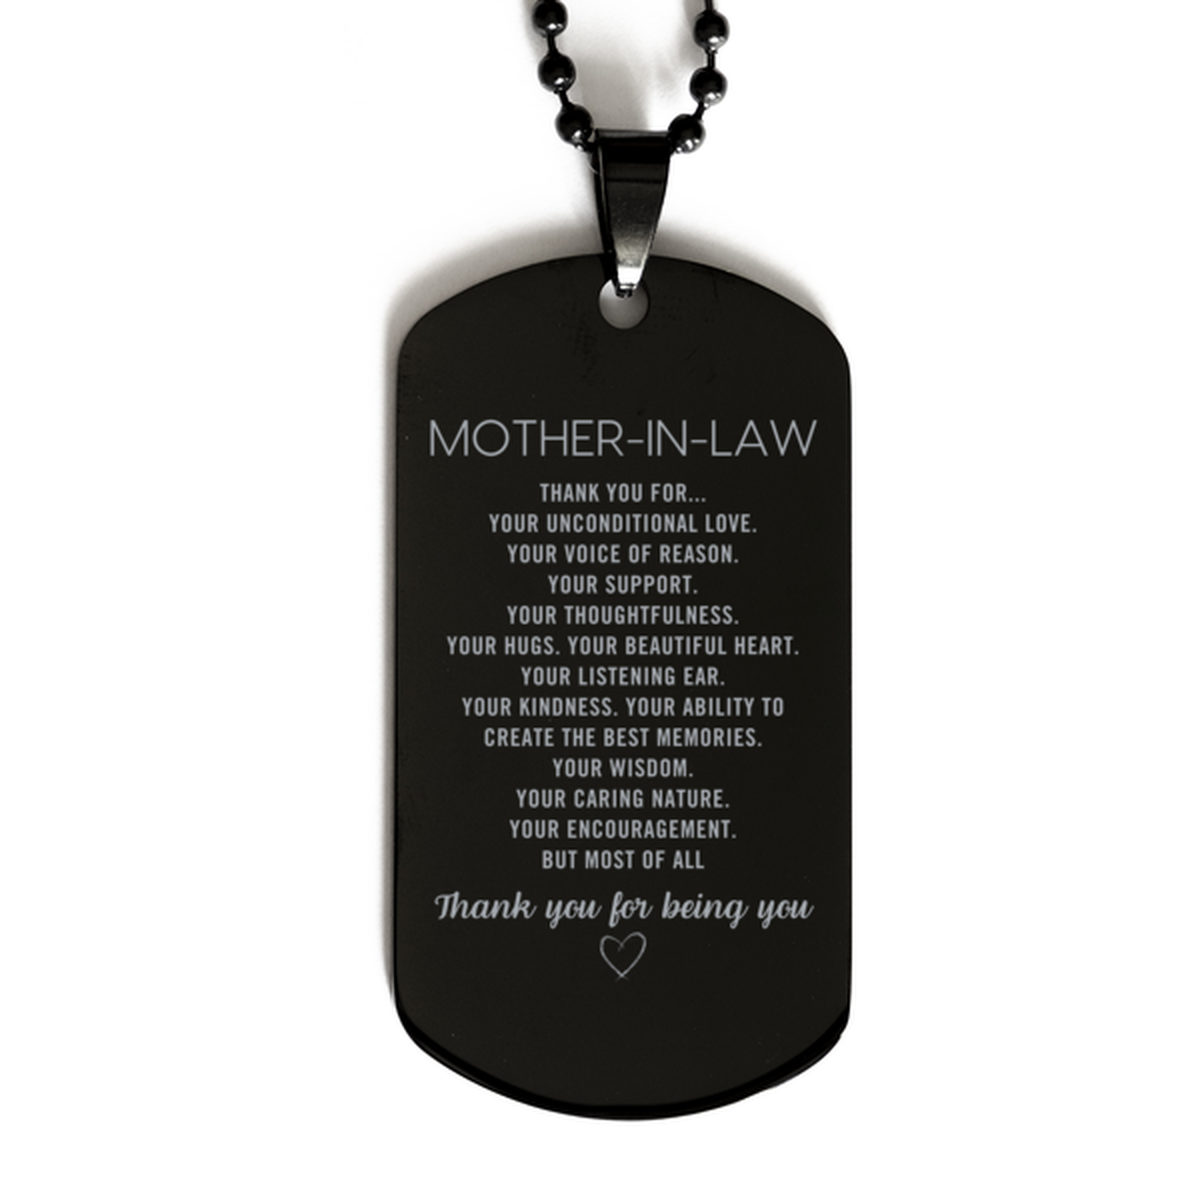 Mother-In-Law Black Dog Tag Custom, Engraved Gifts For Mother-In-Law Christmas Graduation Birthday Gifts for Men Women Mother-In-Law Thank you for Your unconditional love